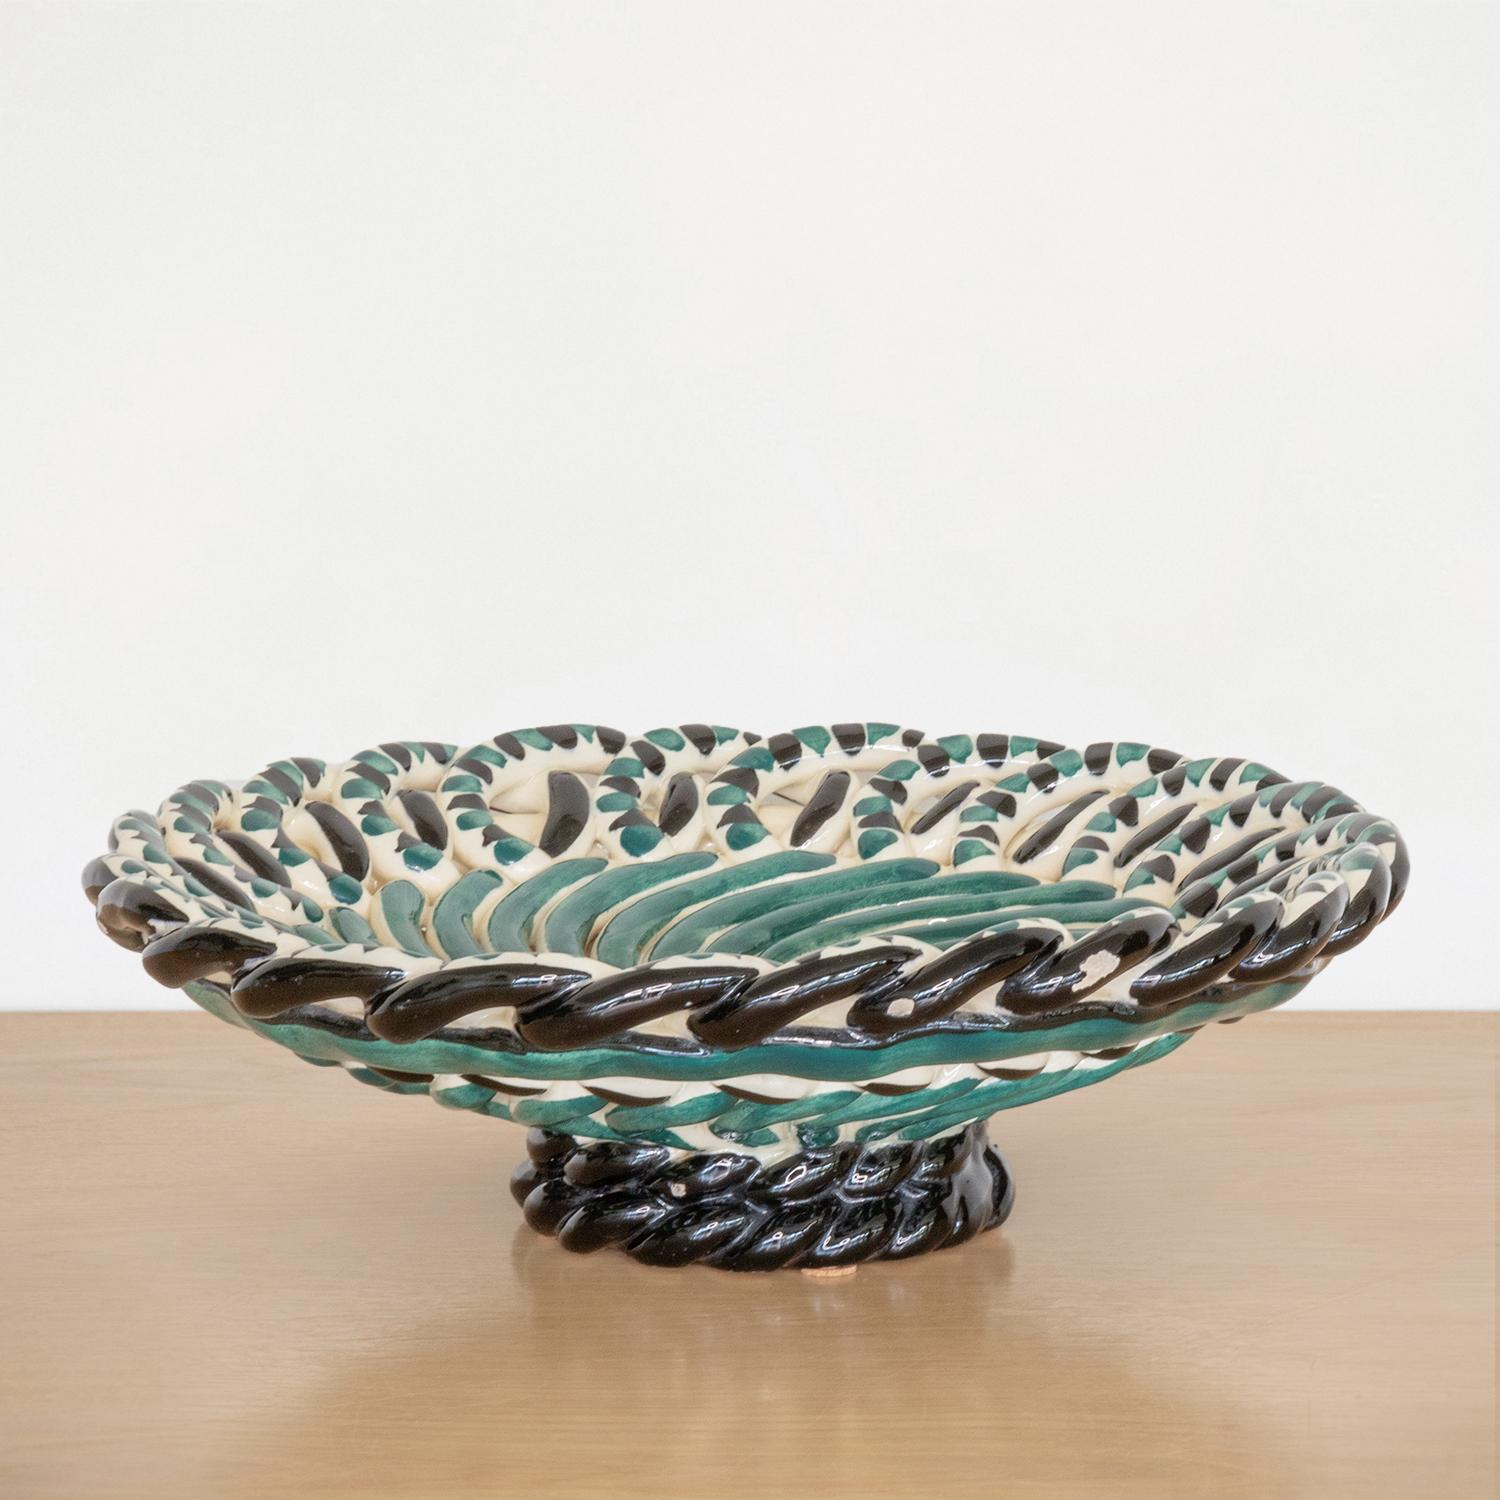 Stunning vintage ceramic bowl with woven loop detail from Vallauris, France. Beautiful spiral detail with green, black, and cream glaze. Unique piece perfect as a decorative object or catch-all.